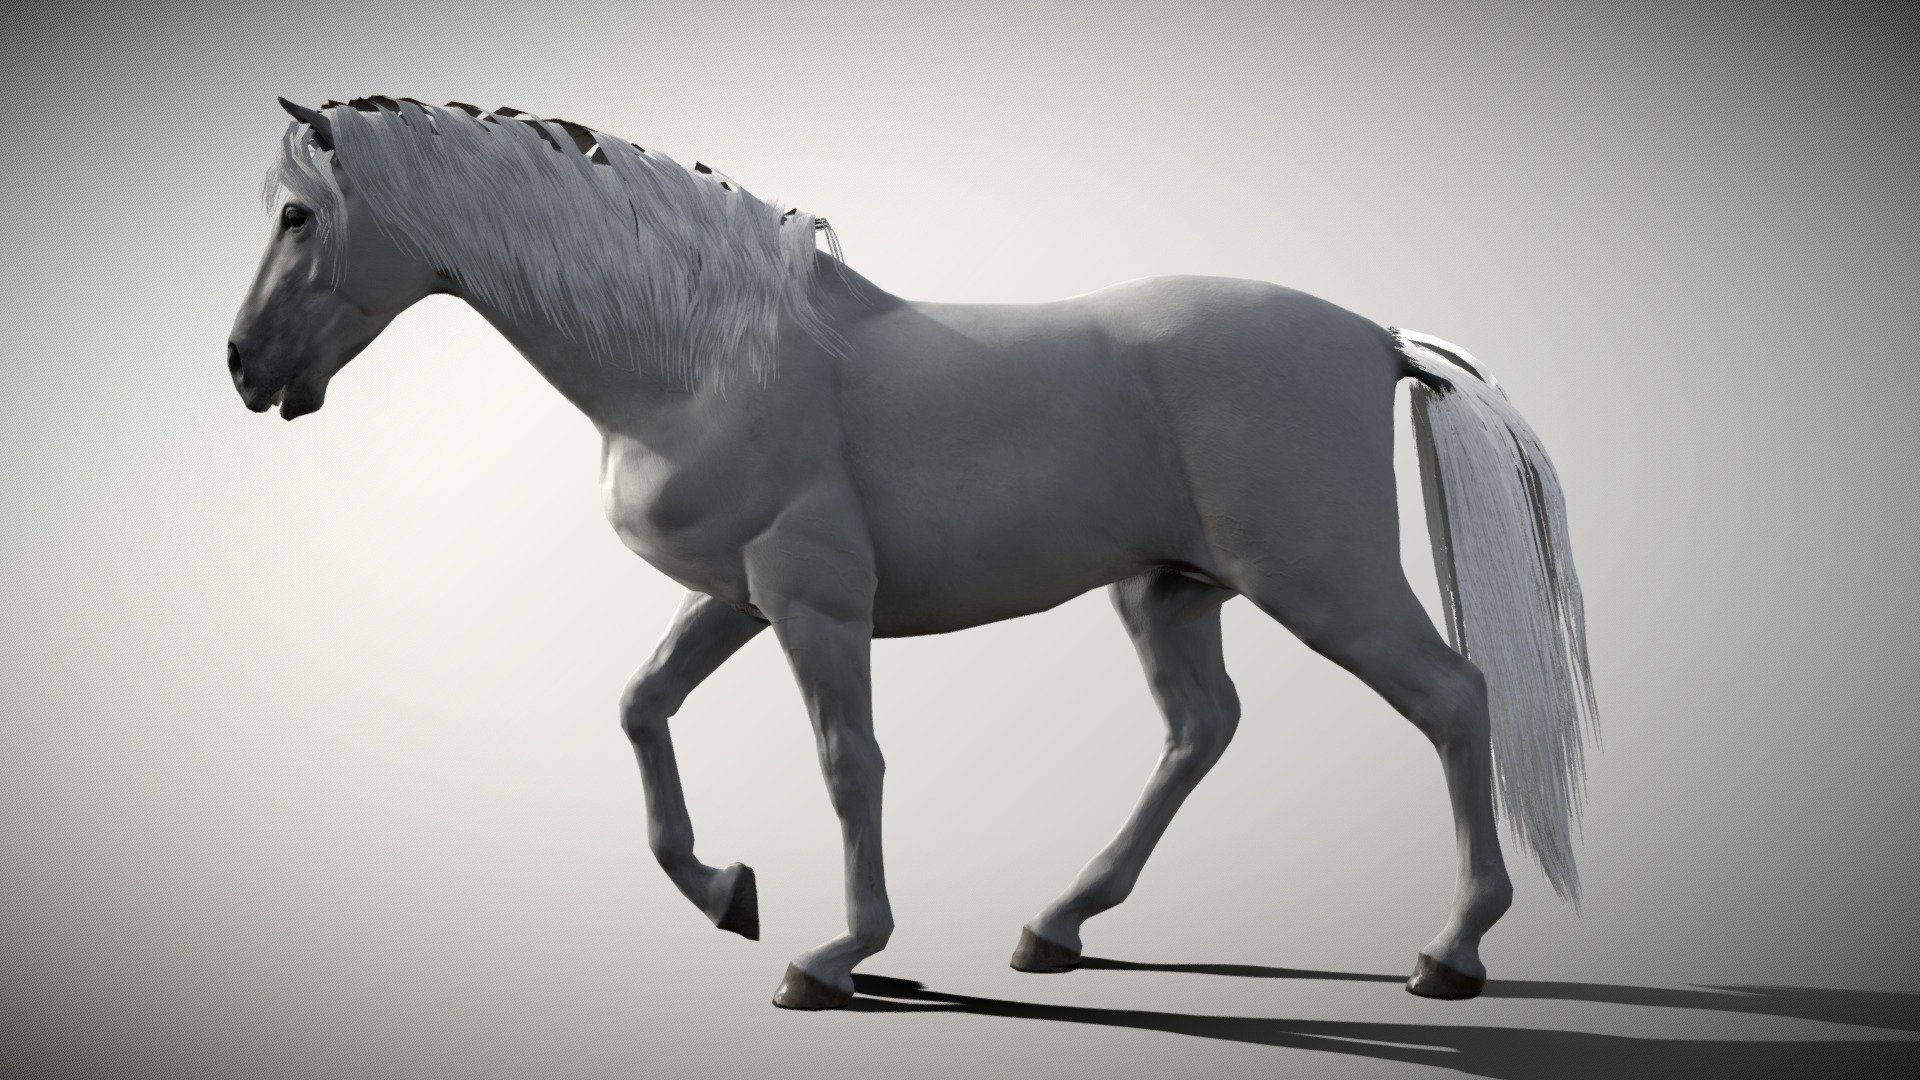 Horse, created in Blender, Zbrush Core and Substance Painter original blender file in the Zip folder uploaded!

Textures 4096x4096:* - body: albedo, roughness, Ambient occlusion, normal, - eyes and teeth: albedo, roughness, Ambient occlusion, normal, opacity - mane and tail: color node, normal and opacity

In https://sketchfab.com/models/e768beead22a4e02a10df627b5057c3f/editthe NLA editor there are 3 option: - walk cycle - run cycle - white horse - Buy Royalty Free 3D model by 3dartstevenz 3d model